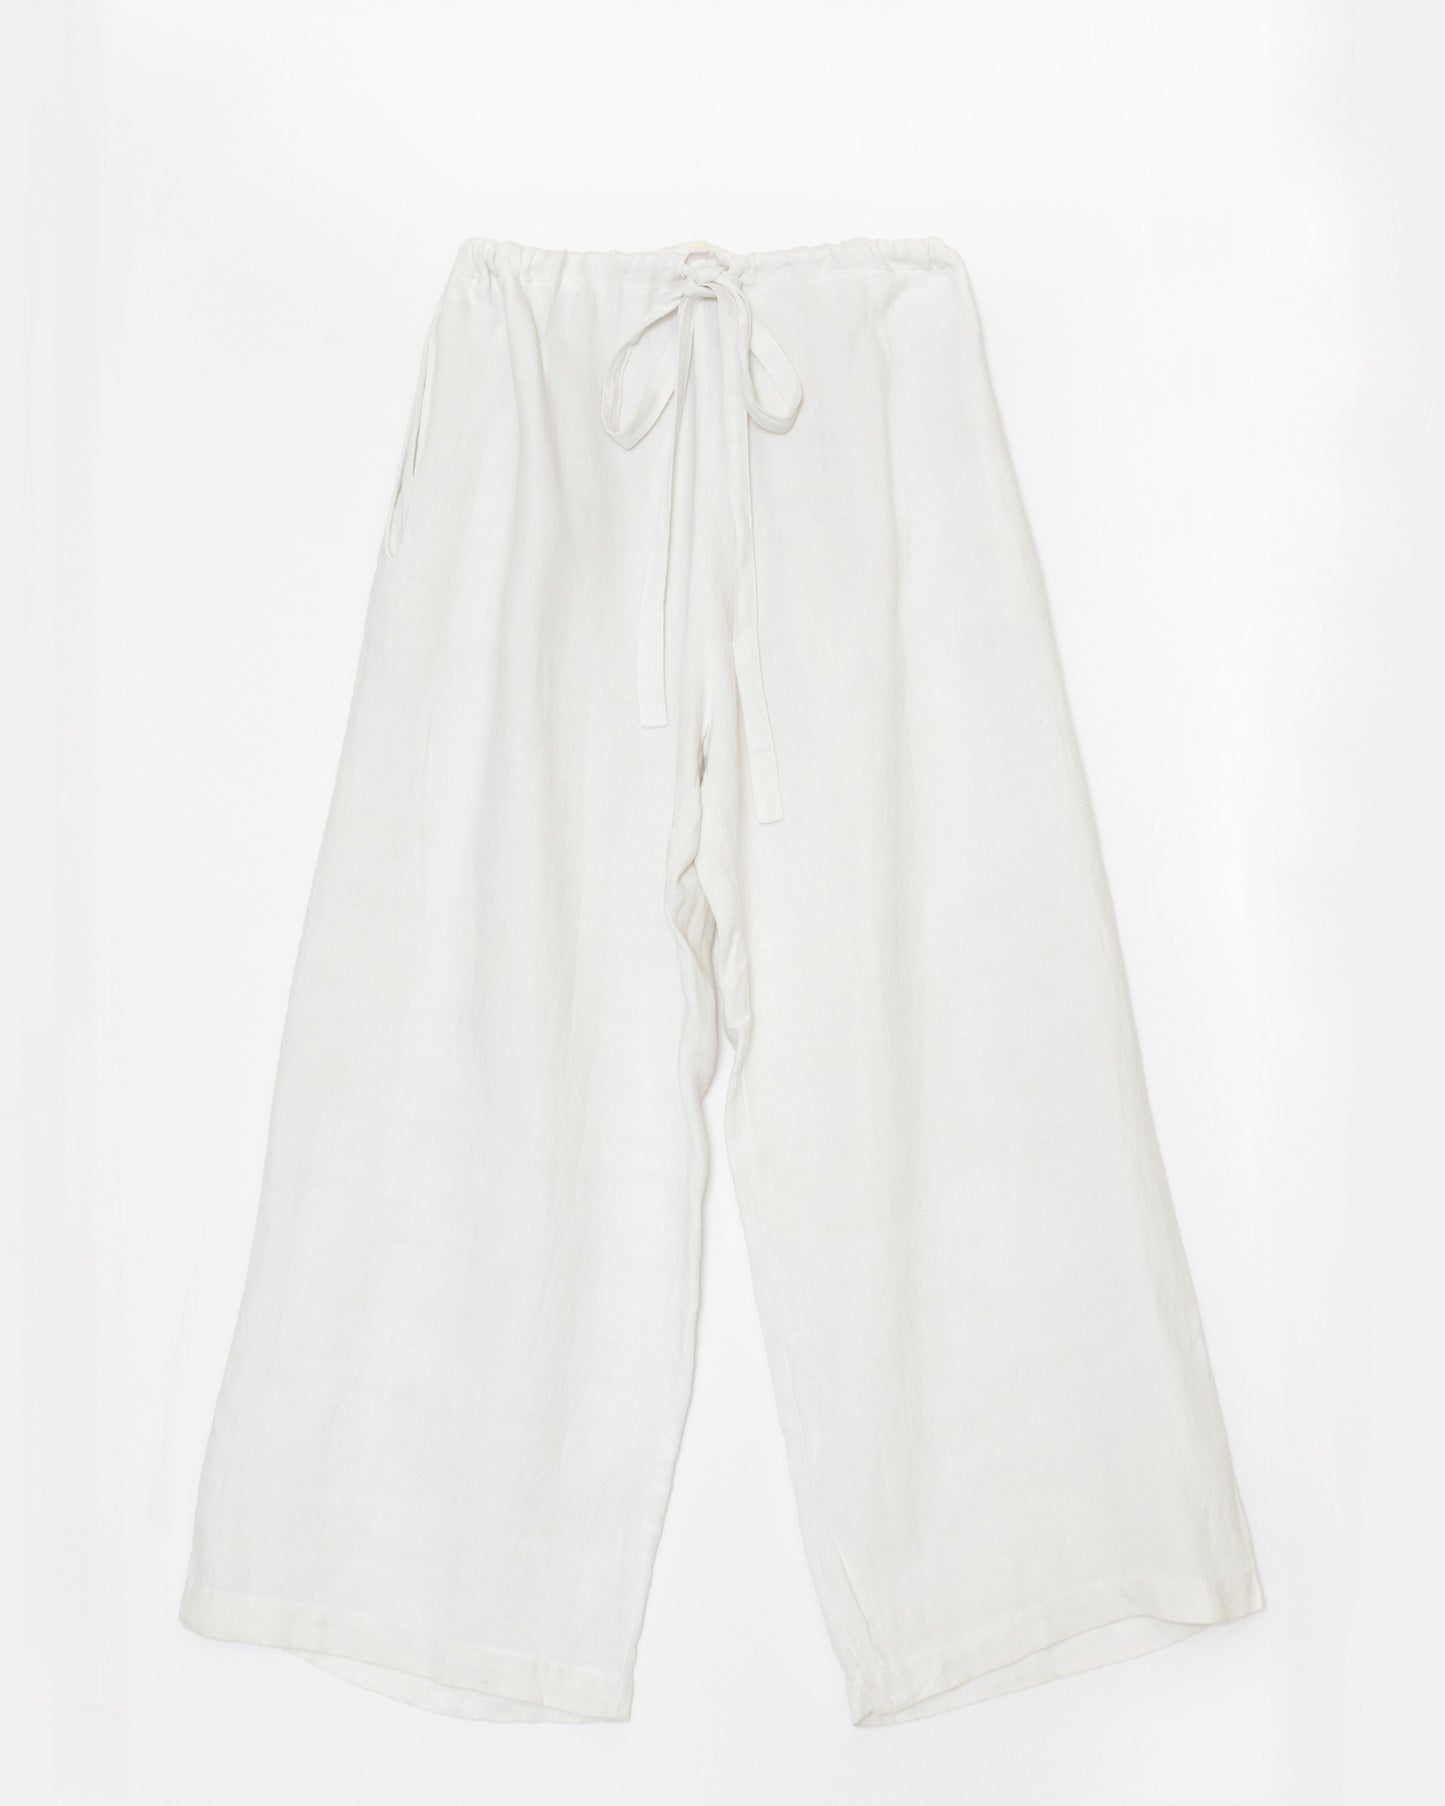 [Whiteread] Trousers 03 - Natural Linen